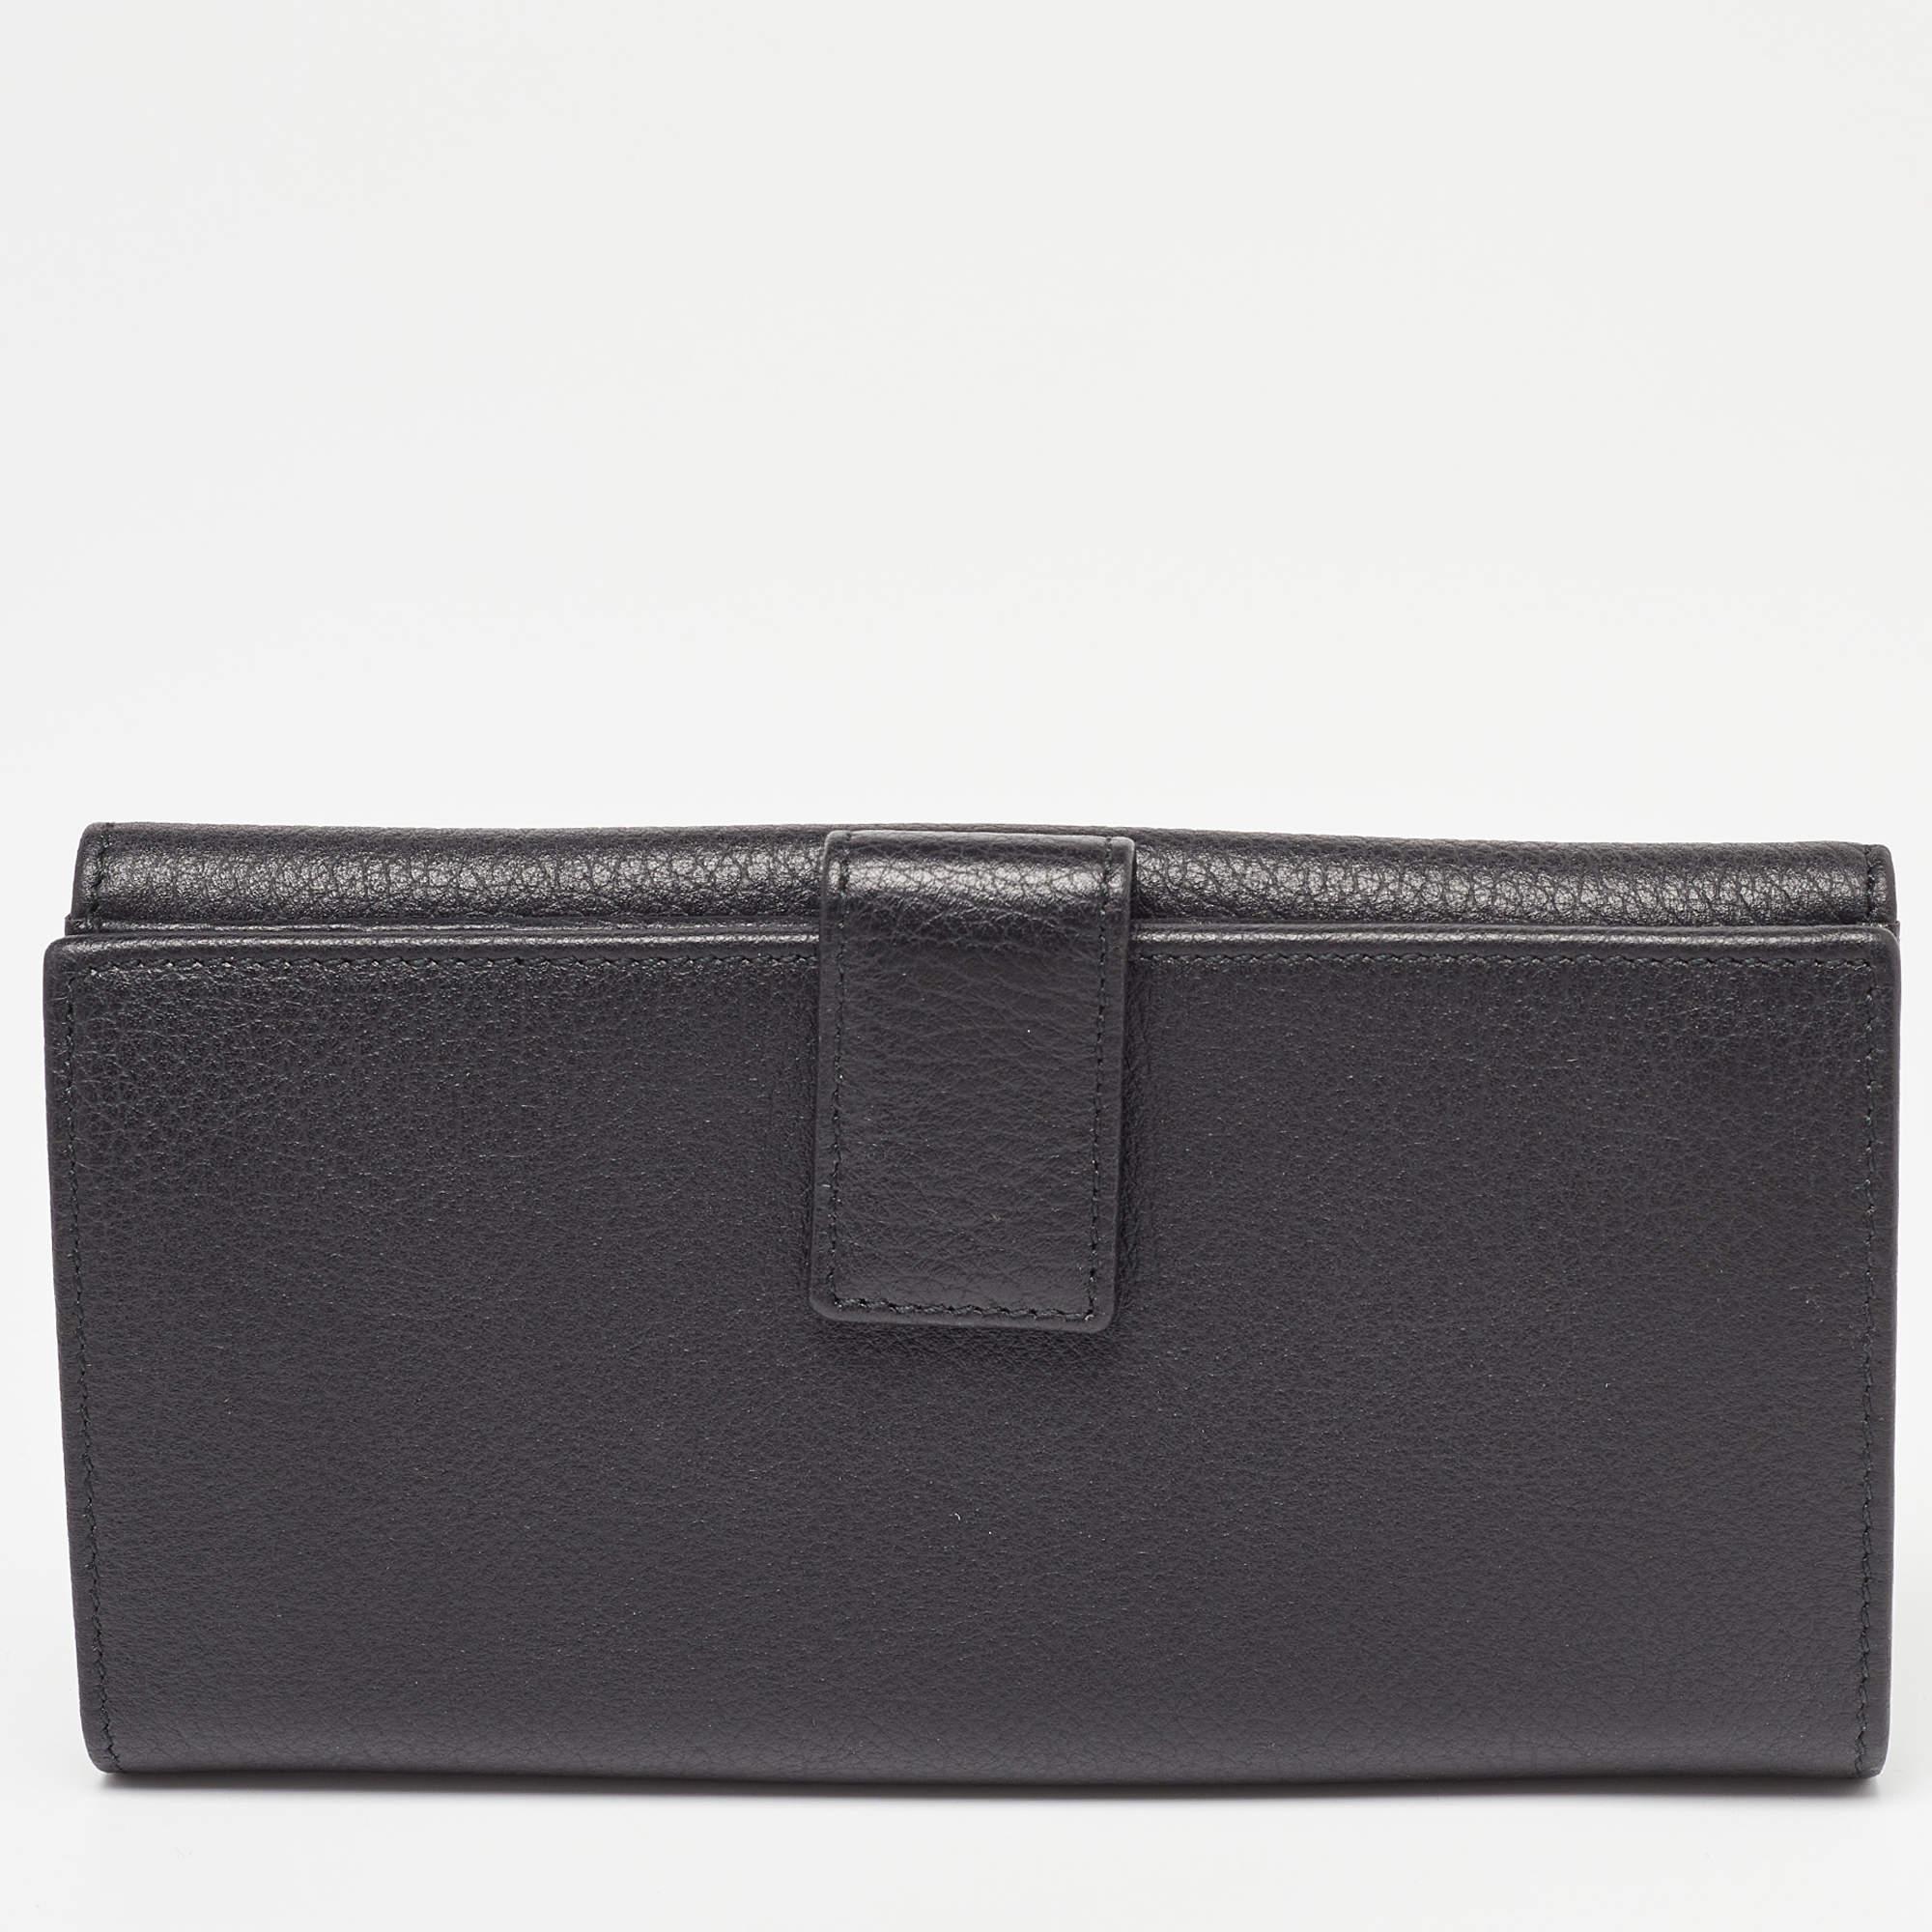 This Gucci wallet is a great everyday accessory. It is made from quality materials on the exterior and features a compartmentalized interior.

Includes: Original Box, Info Booklet